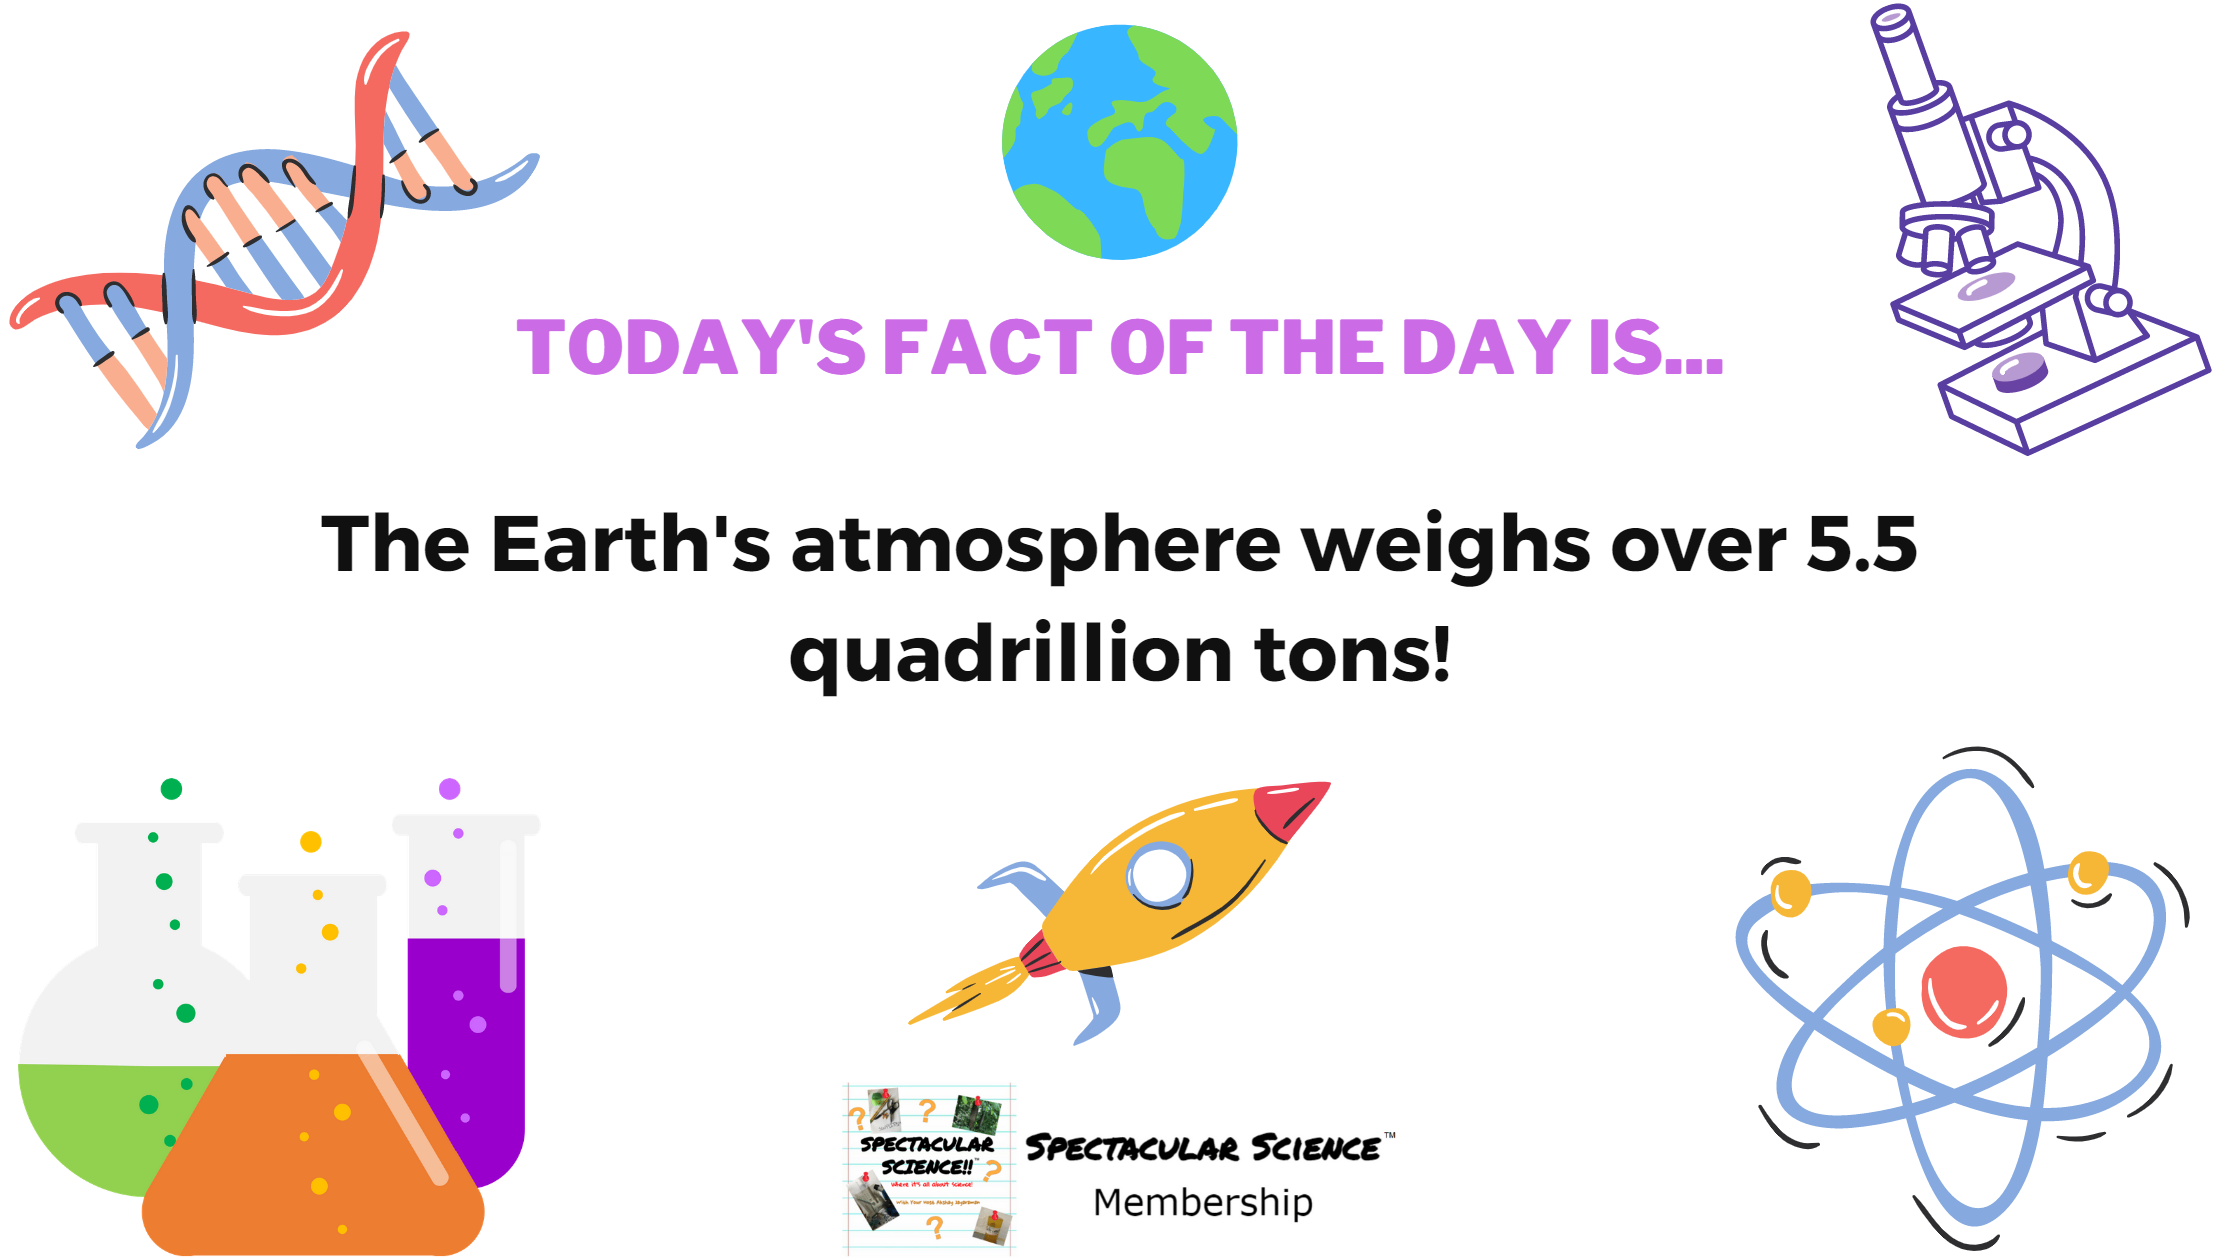 Fact of the Day Image February 22nd